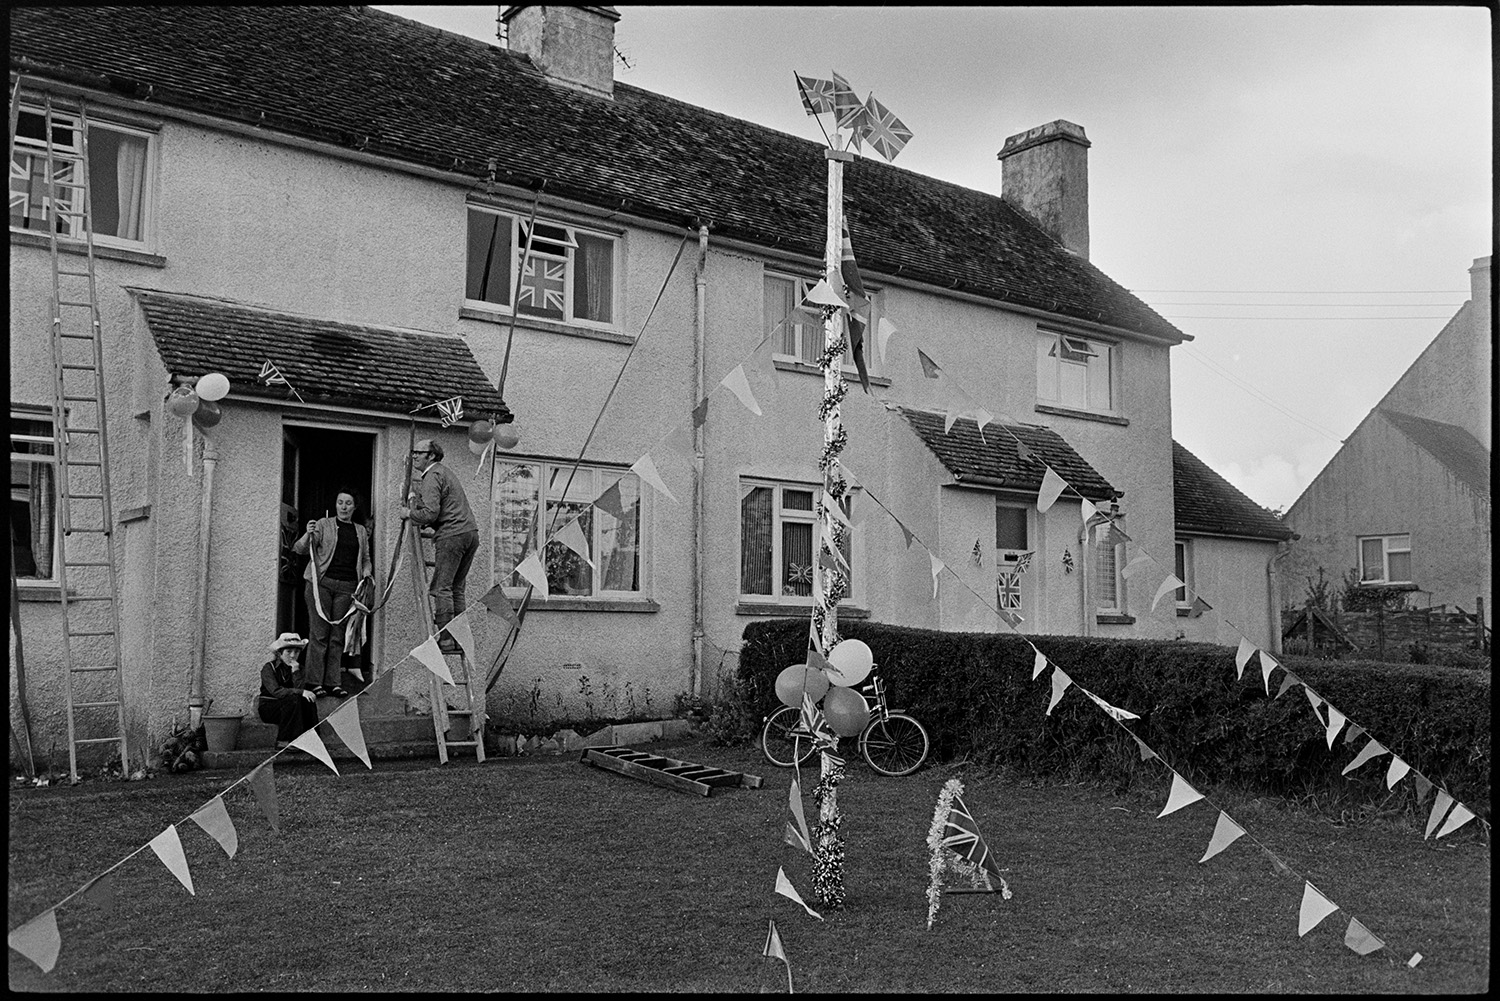 Houses decorated for Silver Jubilee, Electrical shop. 
[A man and woman decorating their house in Dolton with Union Jack flags, balloons and a maypole in the garden on Queen Elizabeth II Silver Jubilee day. Various ladders are propped against the house.]